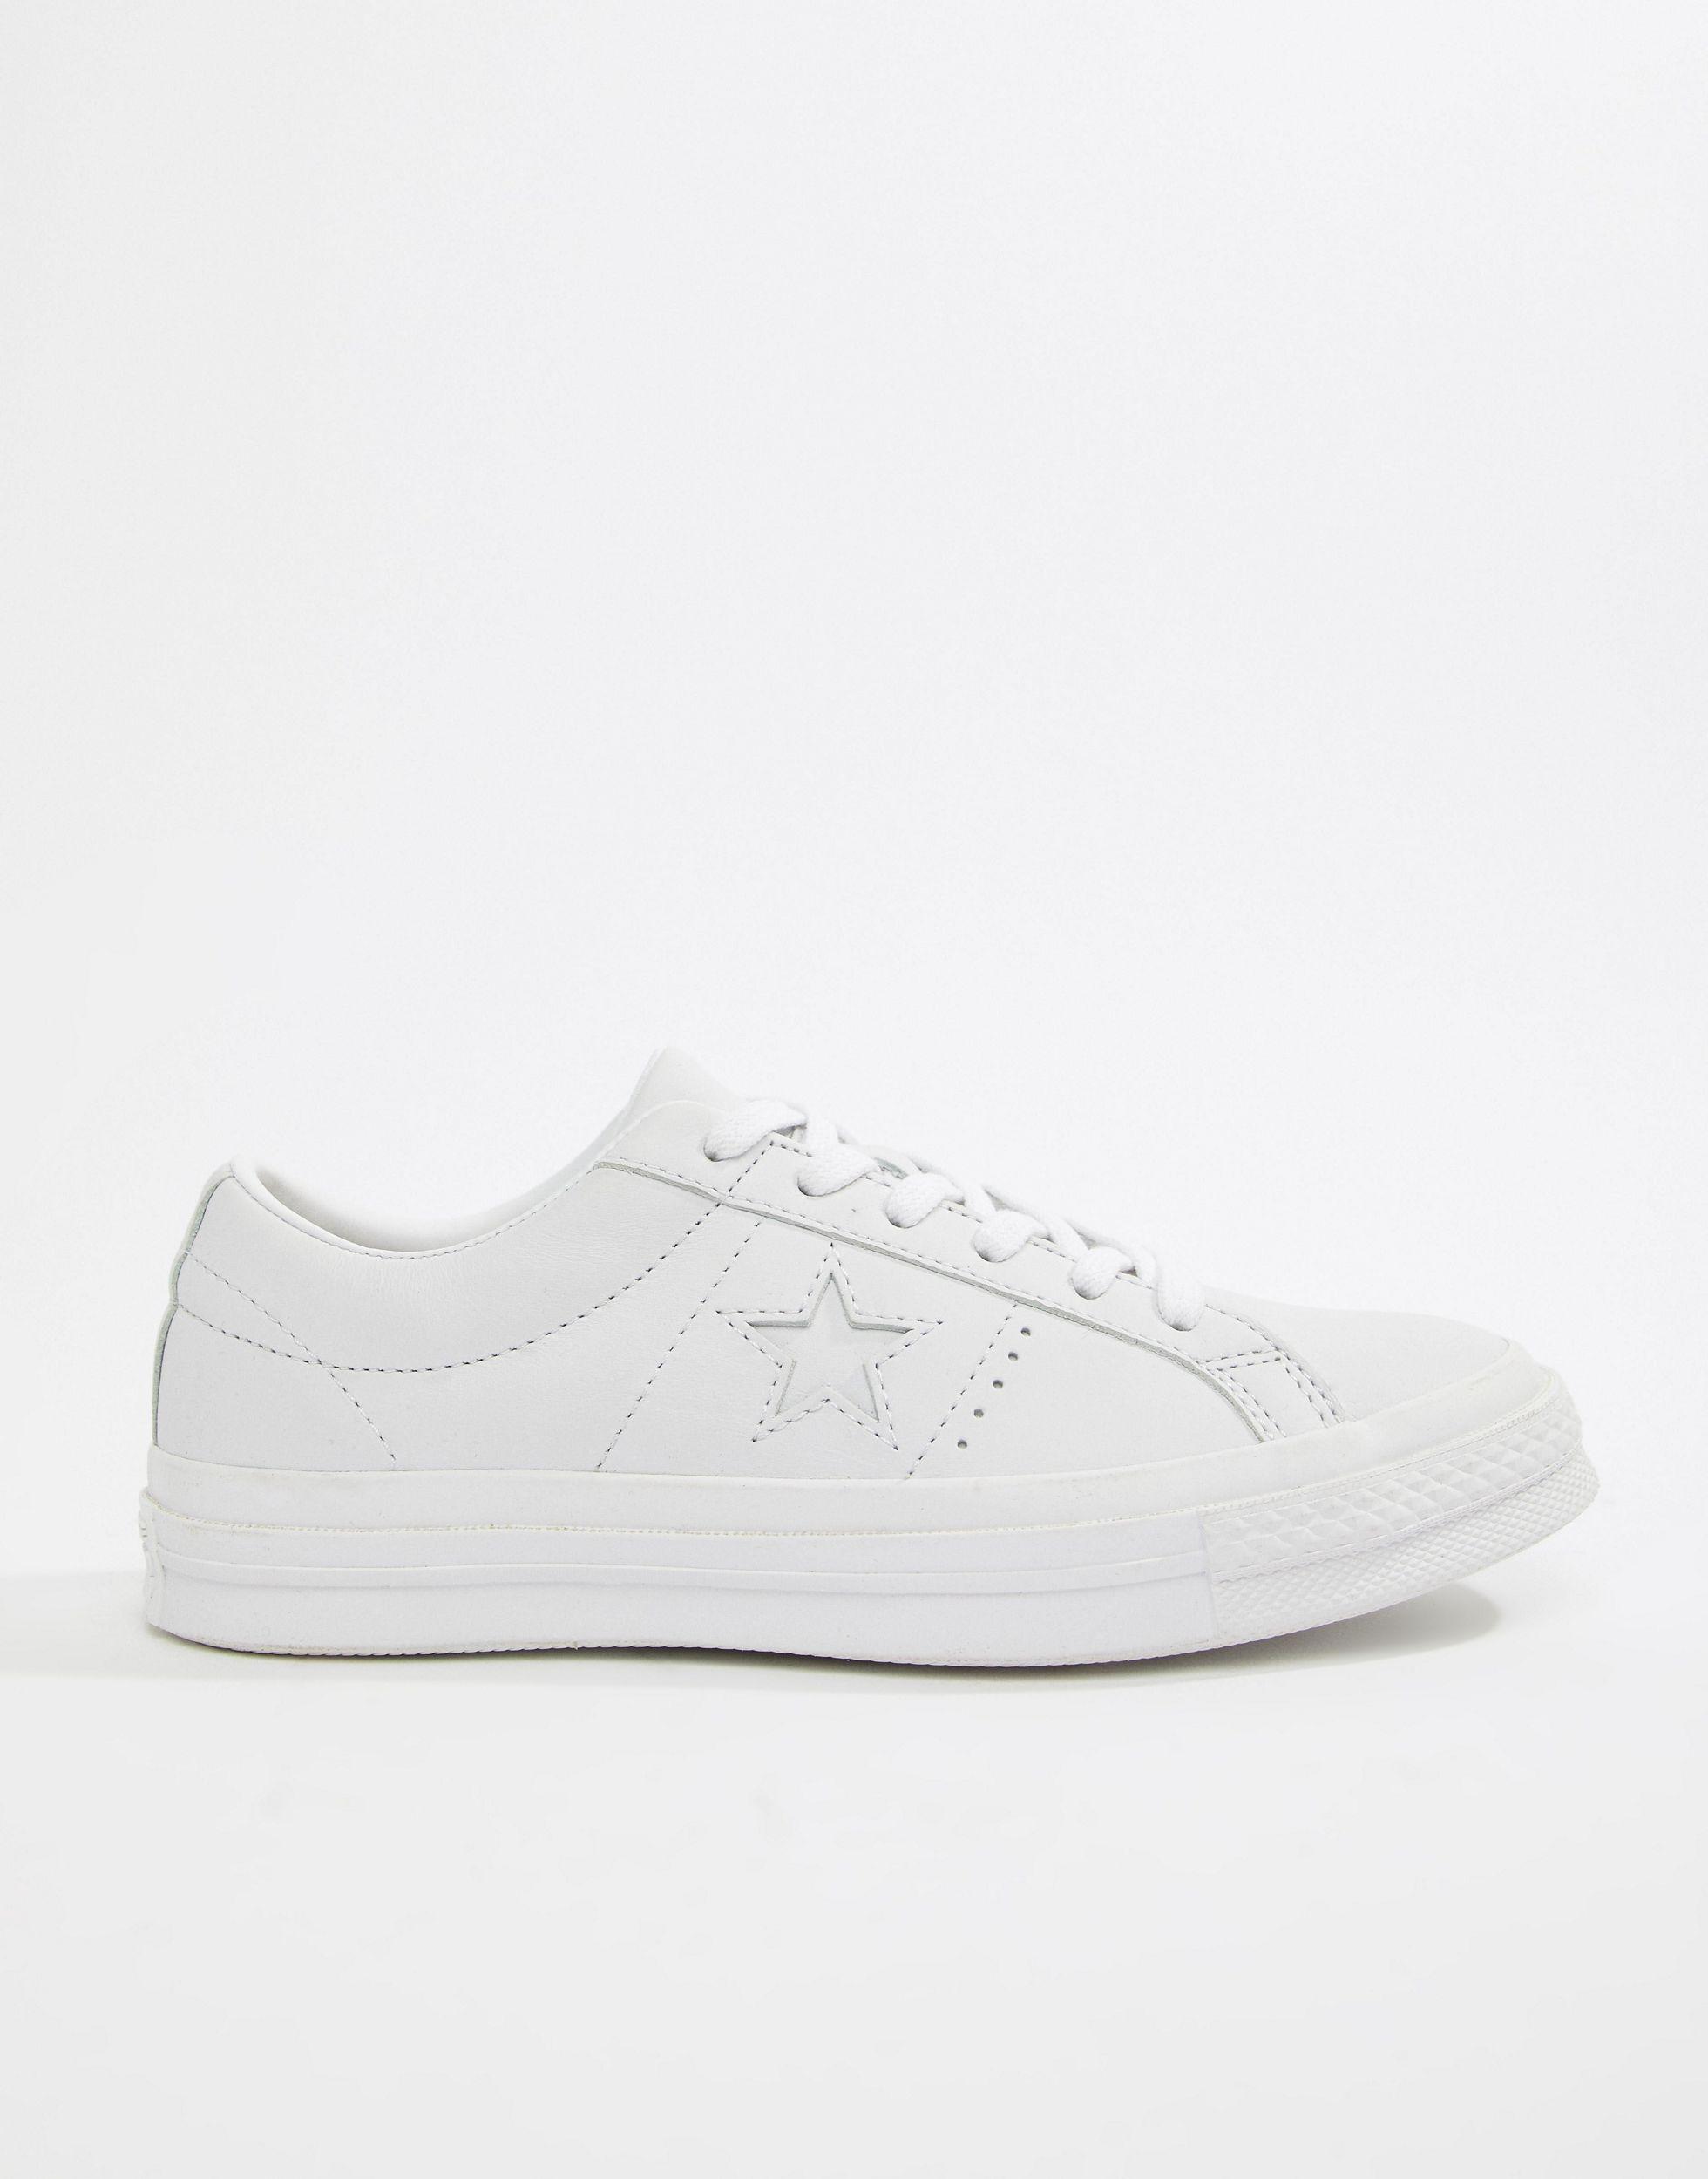 Converse One Star Triple Leather Sneakers in White | Lyst